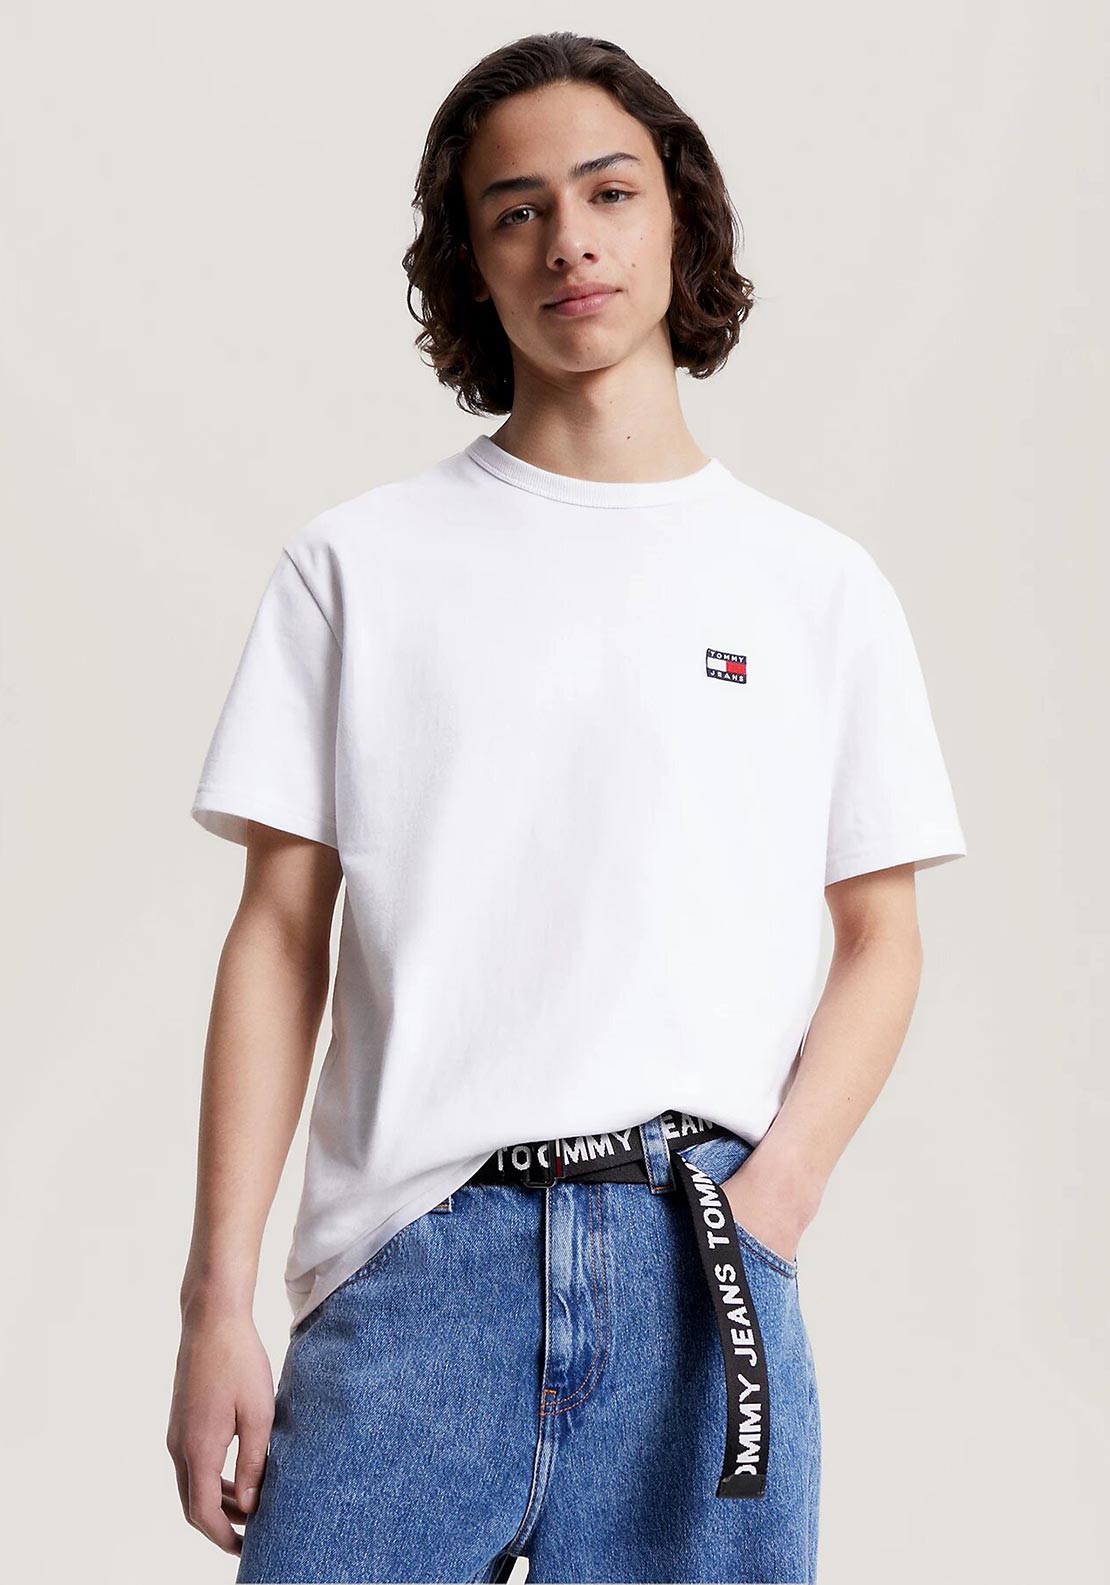 Tommy Jeans XS Badge White T-Shirt, McElhinneys 